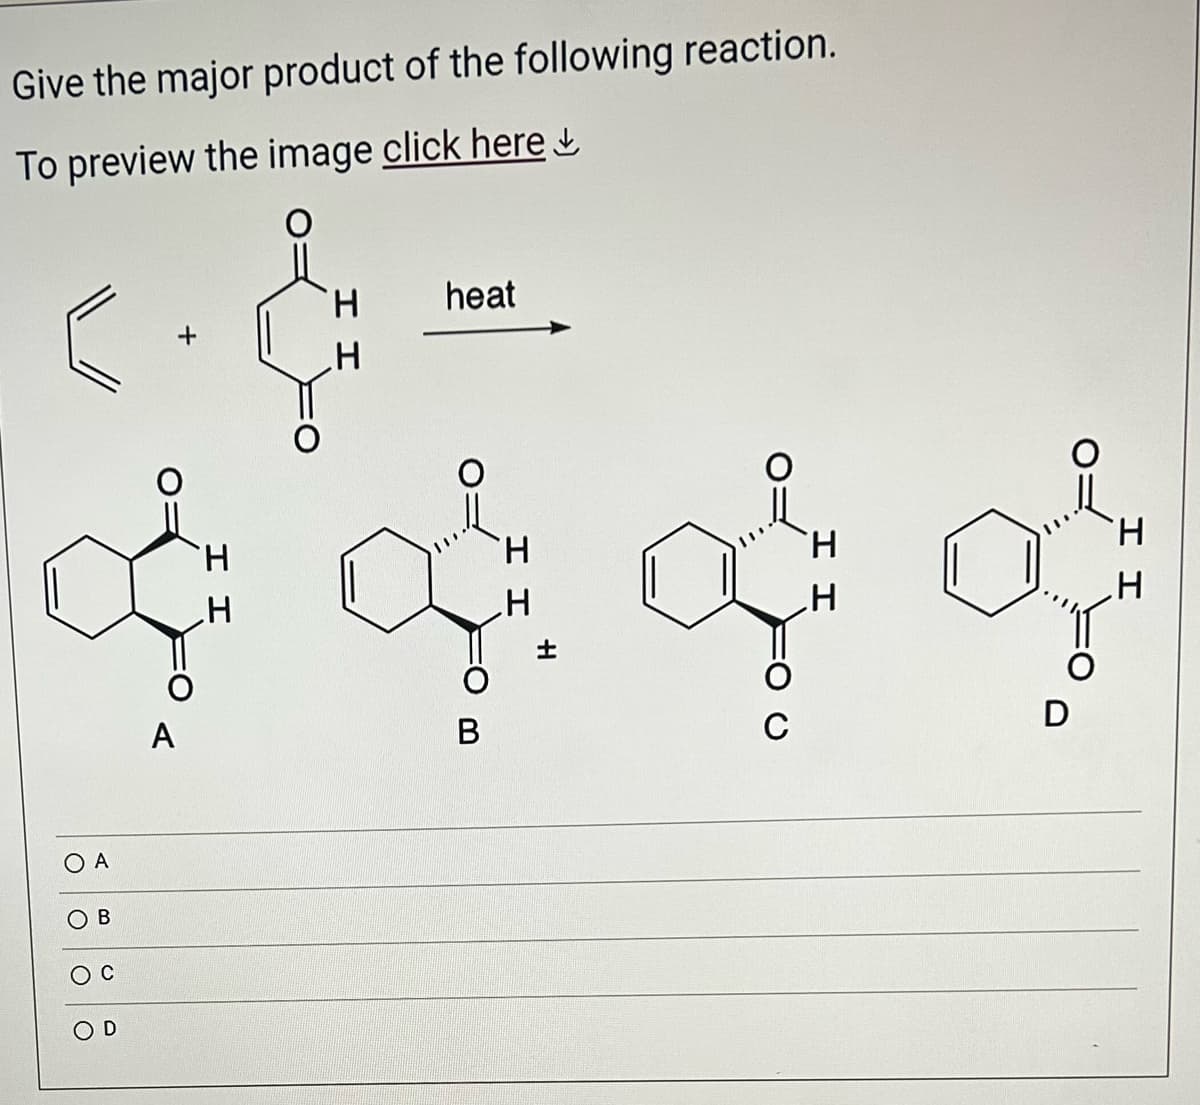 Give the major product of the following reaction.
To preview the image click here
O A
B
H
ထုံးထုံးထုံးထုံး
.H
B
C
OD
+
A
H
H
.H
.H
heat
H
D